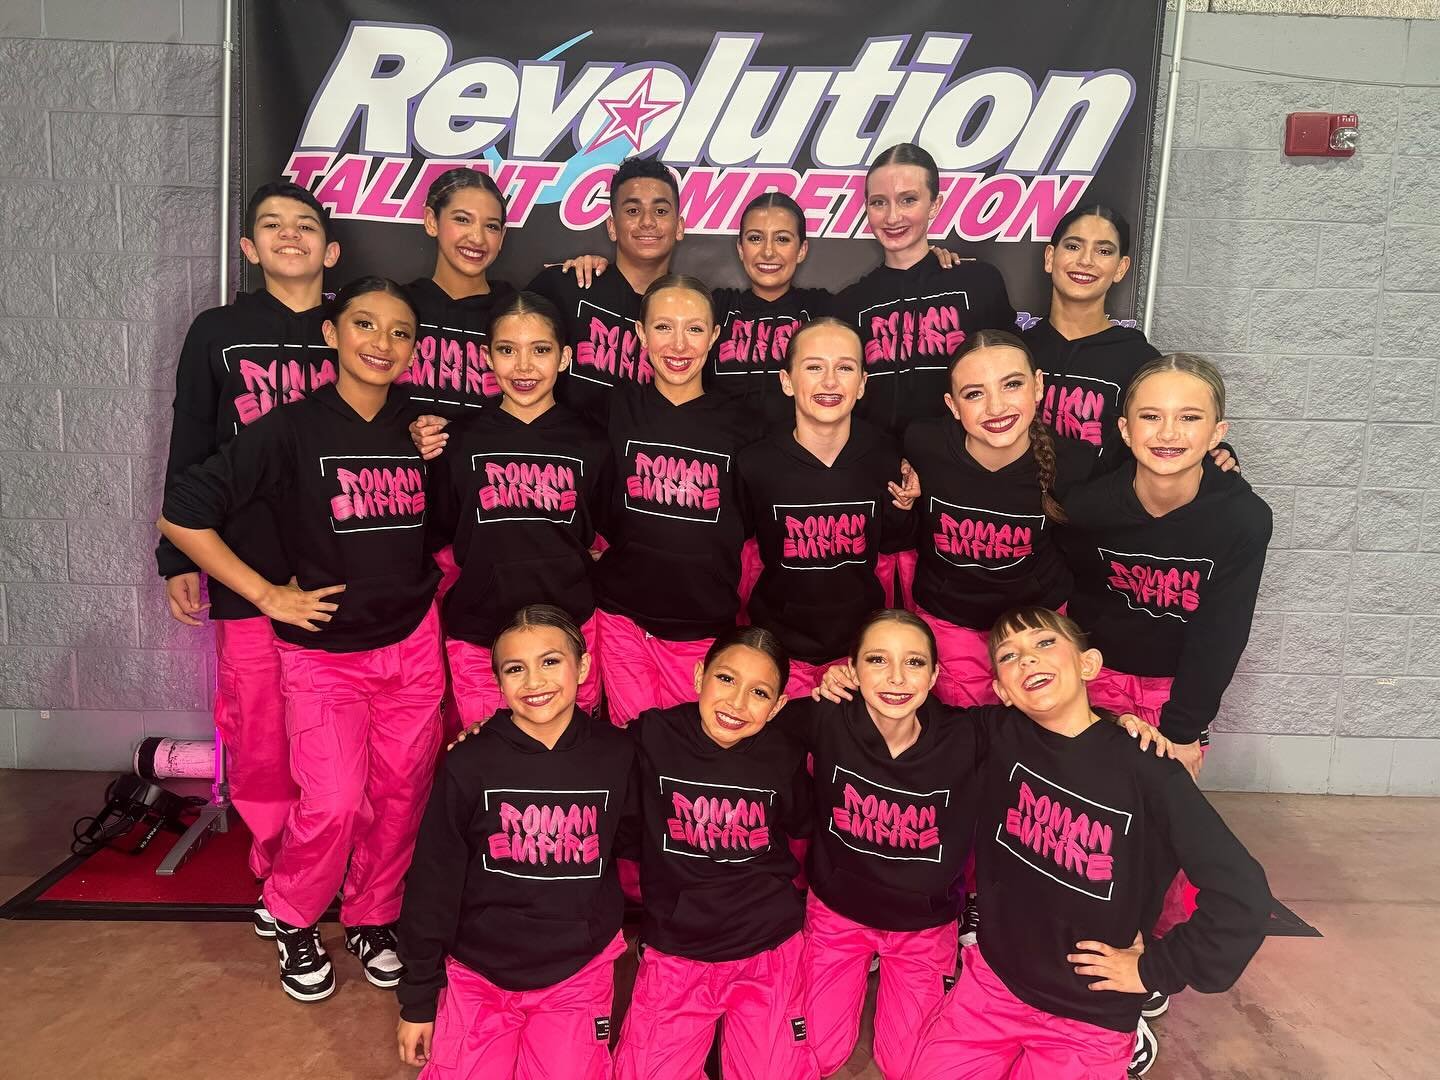 Revolution Talent! Take us back! We had so much fun as a full team! Thank you @revotalent for having us! We can't wait to see you at nationals!!